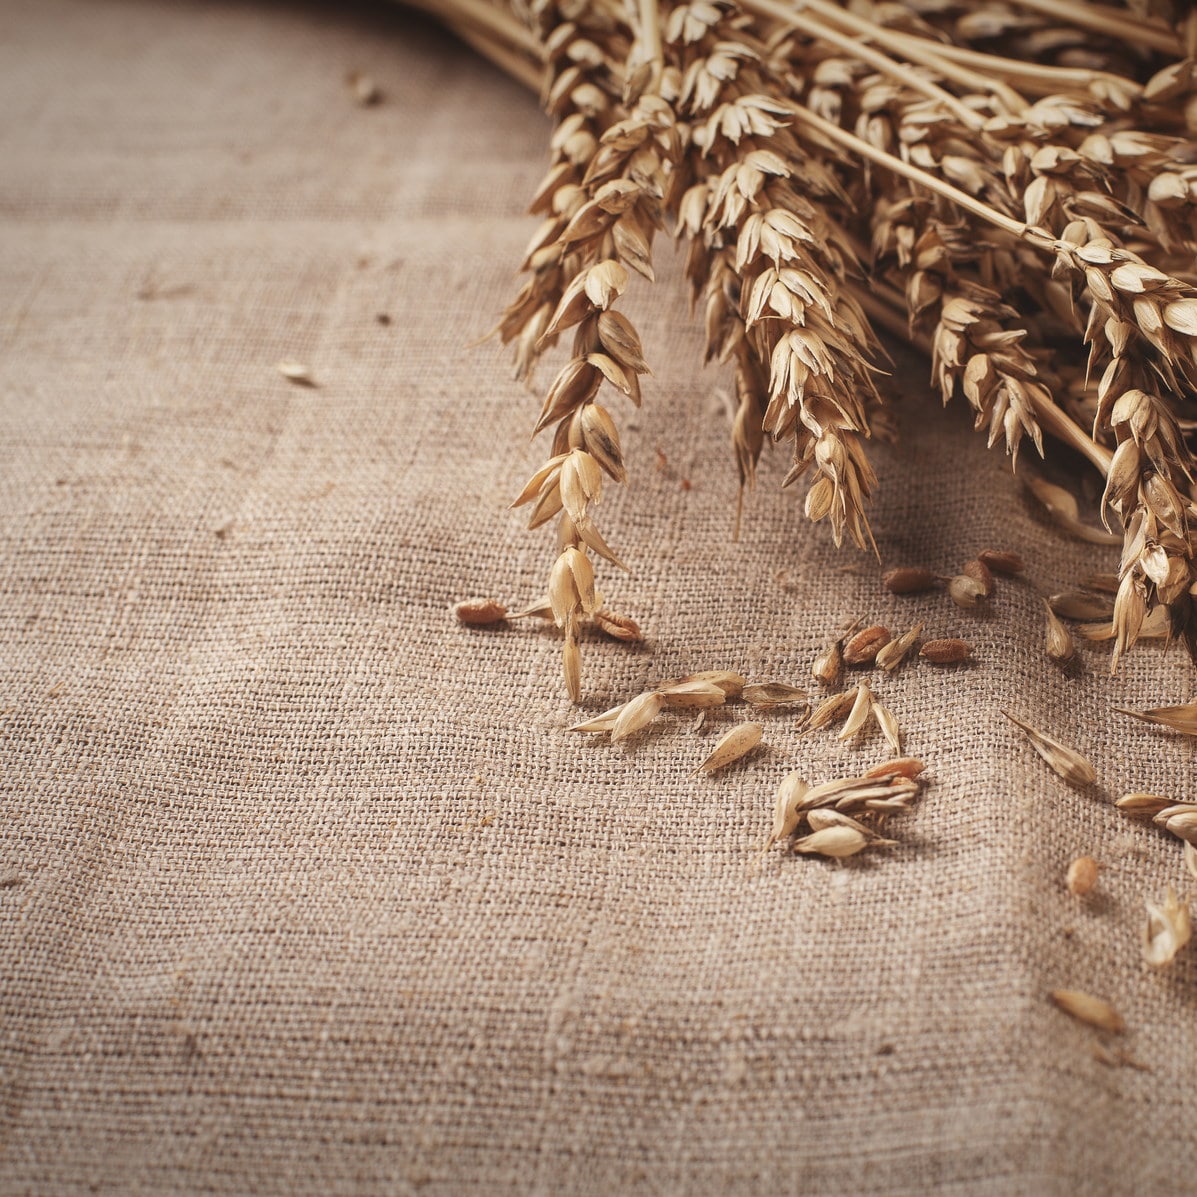 What Is Jute? Our Favorite Natural Material, Demystified